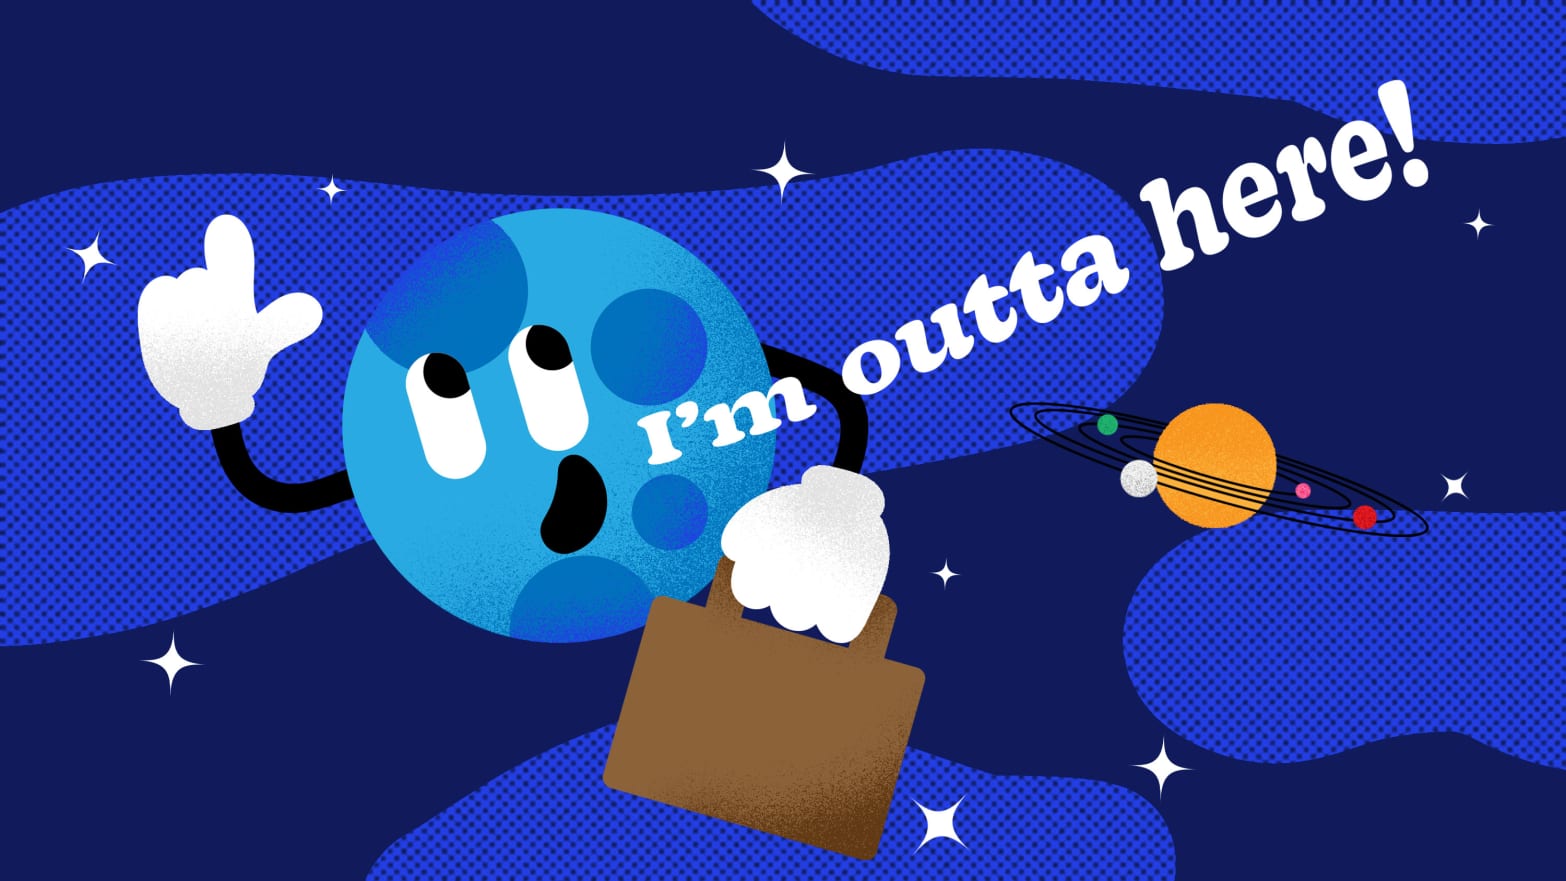 Illustration of the moon saying "i'm outta here"